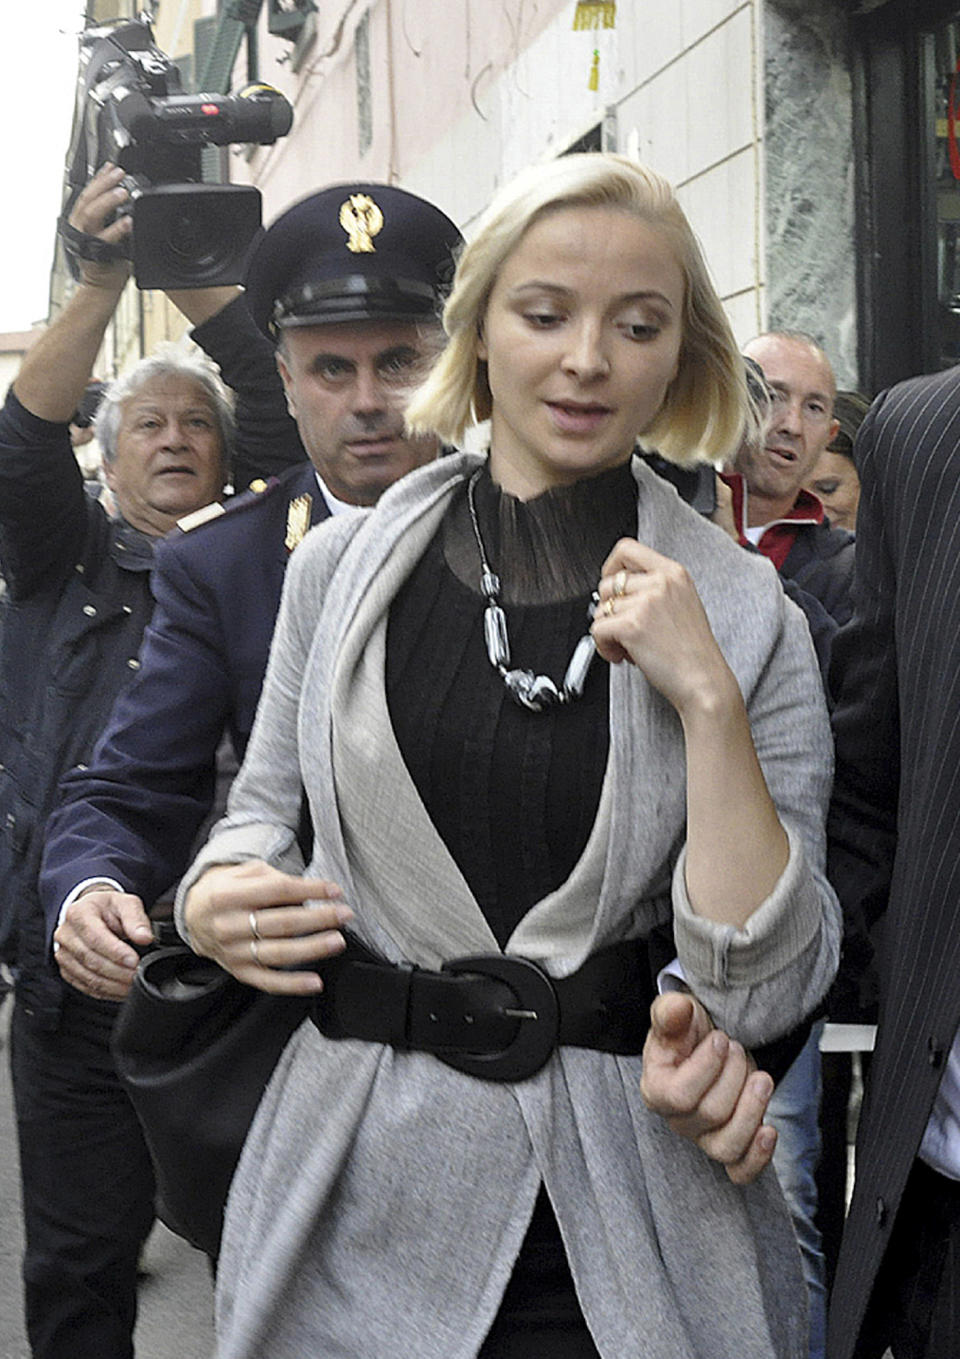 Domnica Cemortan, from Moldavia, leaves the converted Teatro Moderno theater after testifying in a hearing in the trial of Captain Francesco Schettino, in Grosseto, Italy, Tuesday, Oct. 29, 2013. The Moldovan dancer, who was on the bridge when the Costa Concordia crashed into the reef, has testified she was the lover of captain Schettino. The captain of the wrecked Costa Concordia is charged with manslaughter, causing the shipwreck and abandoning ship before the luxury cruise liner's 4,200 passengers and crew could be evacuated on Jan. 13, 2012 when the ship collided with a reef off the Tuscan island of Giglio, killing 32 people. (AP Photo/Giacomo Aprili)